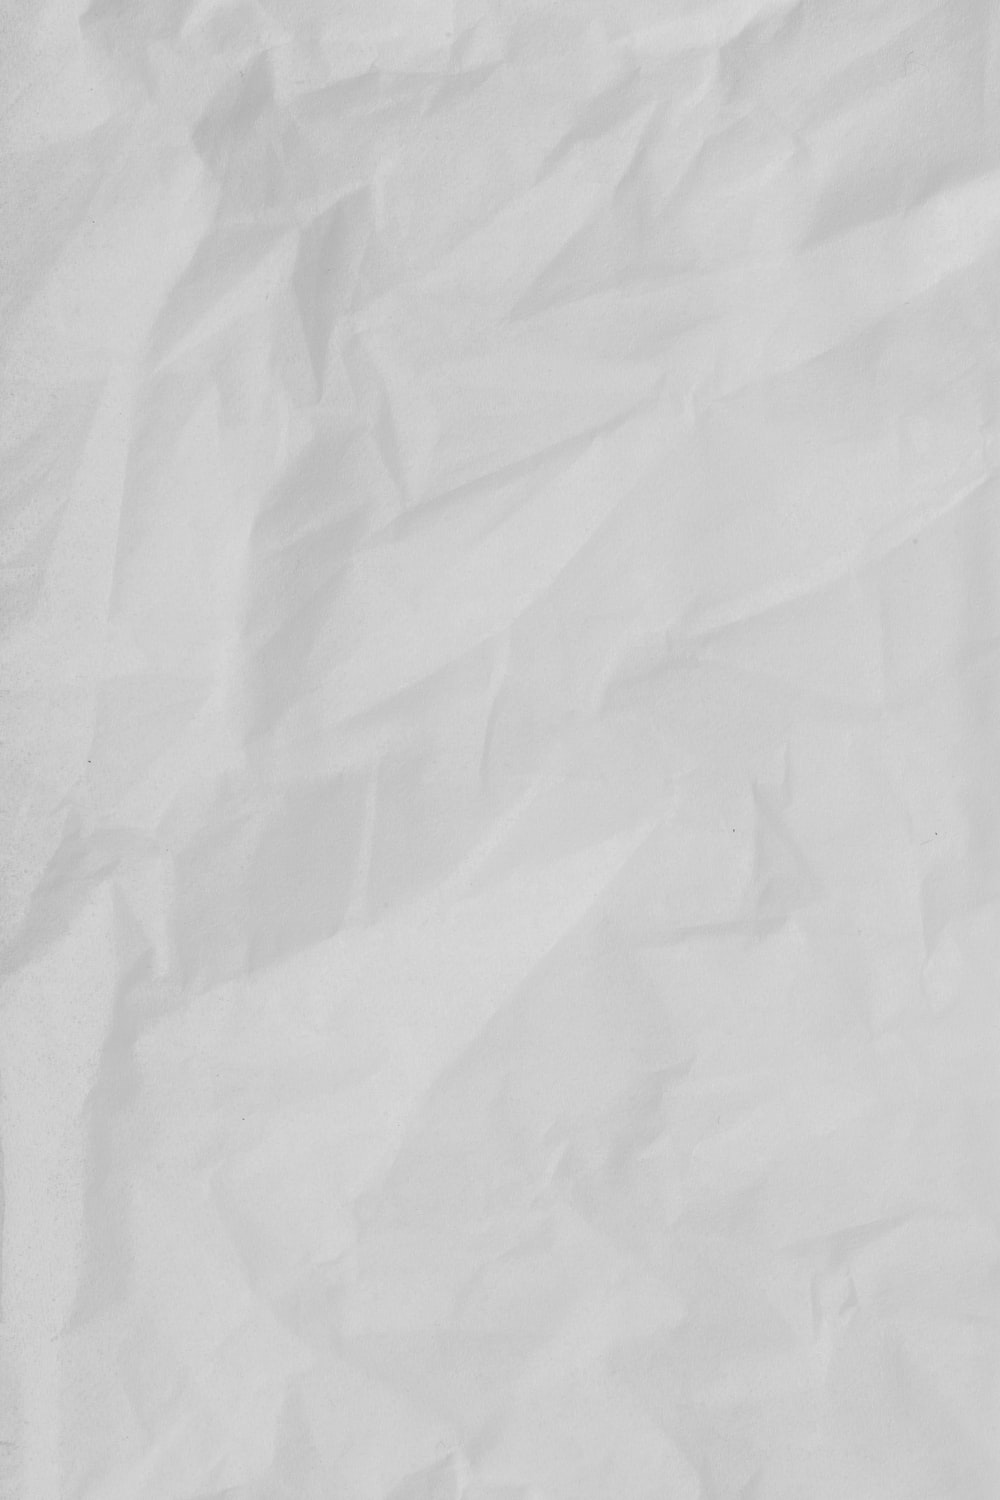 Paper Background Image HD Background